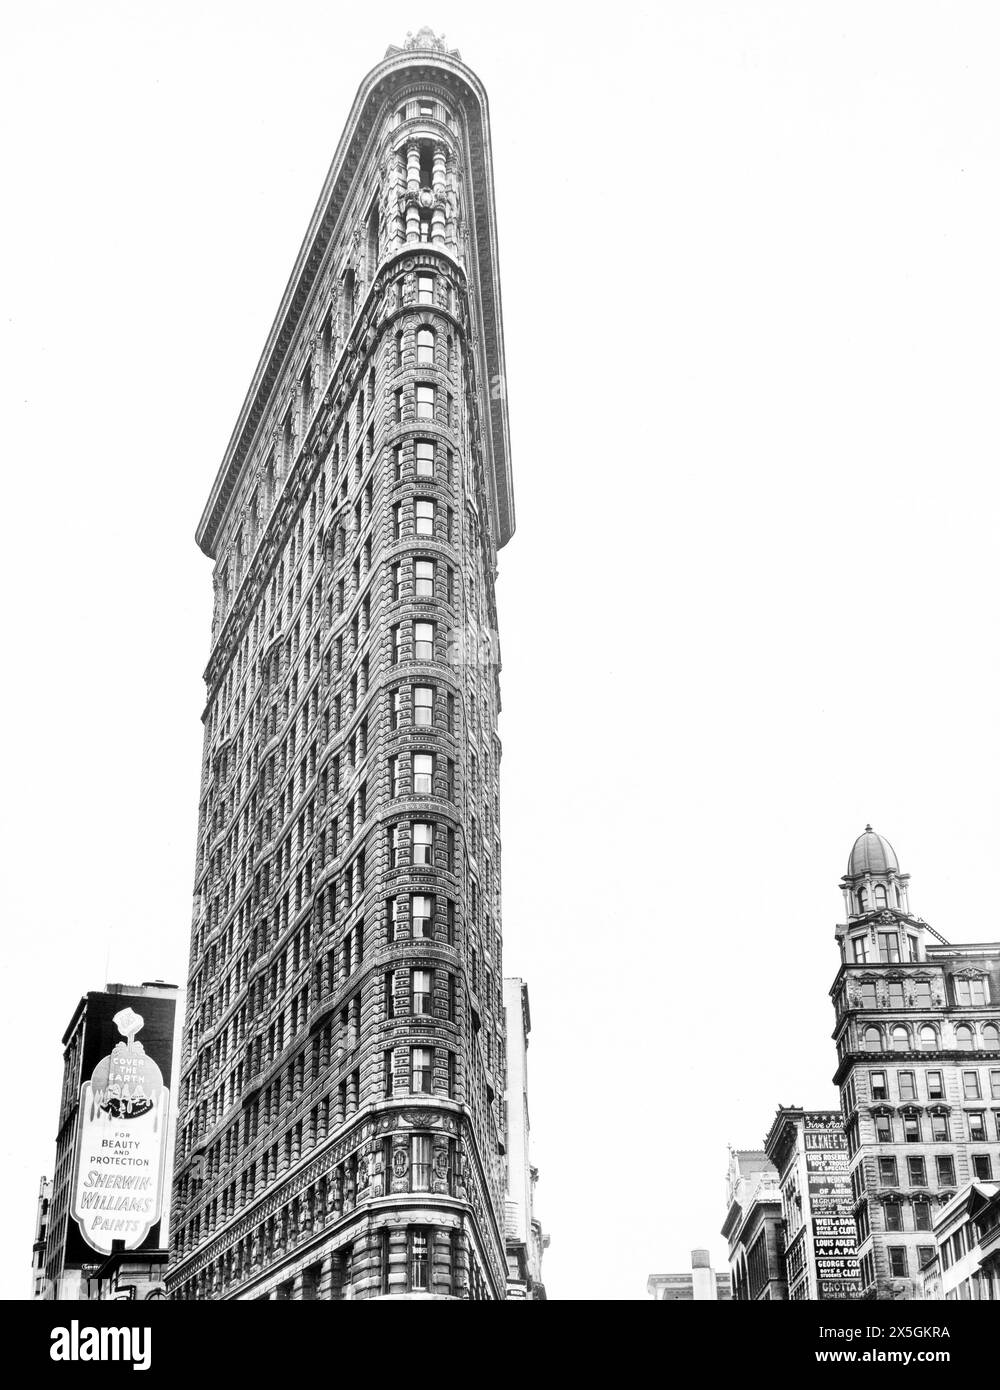 Flatiron Building, 23rd Street and Fifth Avenue, New York City, New York, États-Unis, Berenice Abbott, Federal Art Project, 'Changing New York', mai 1938 Banque D'Images